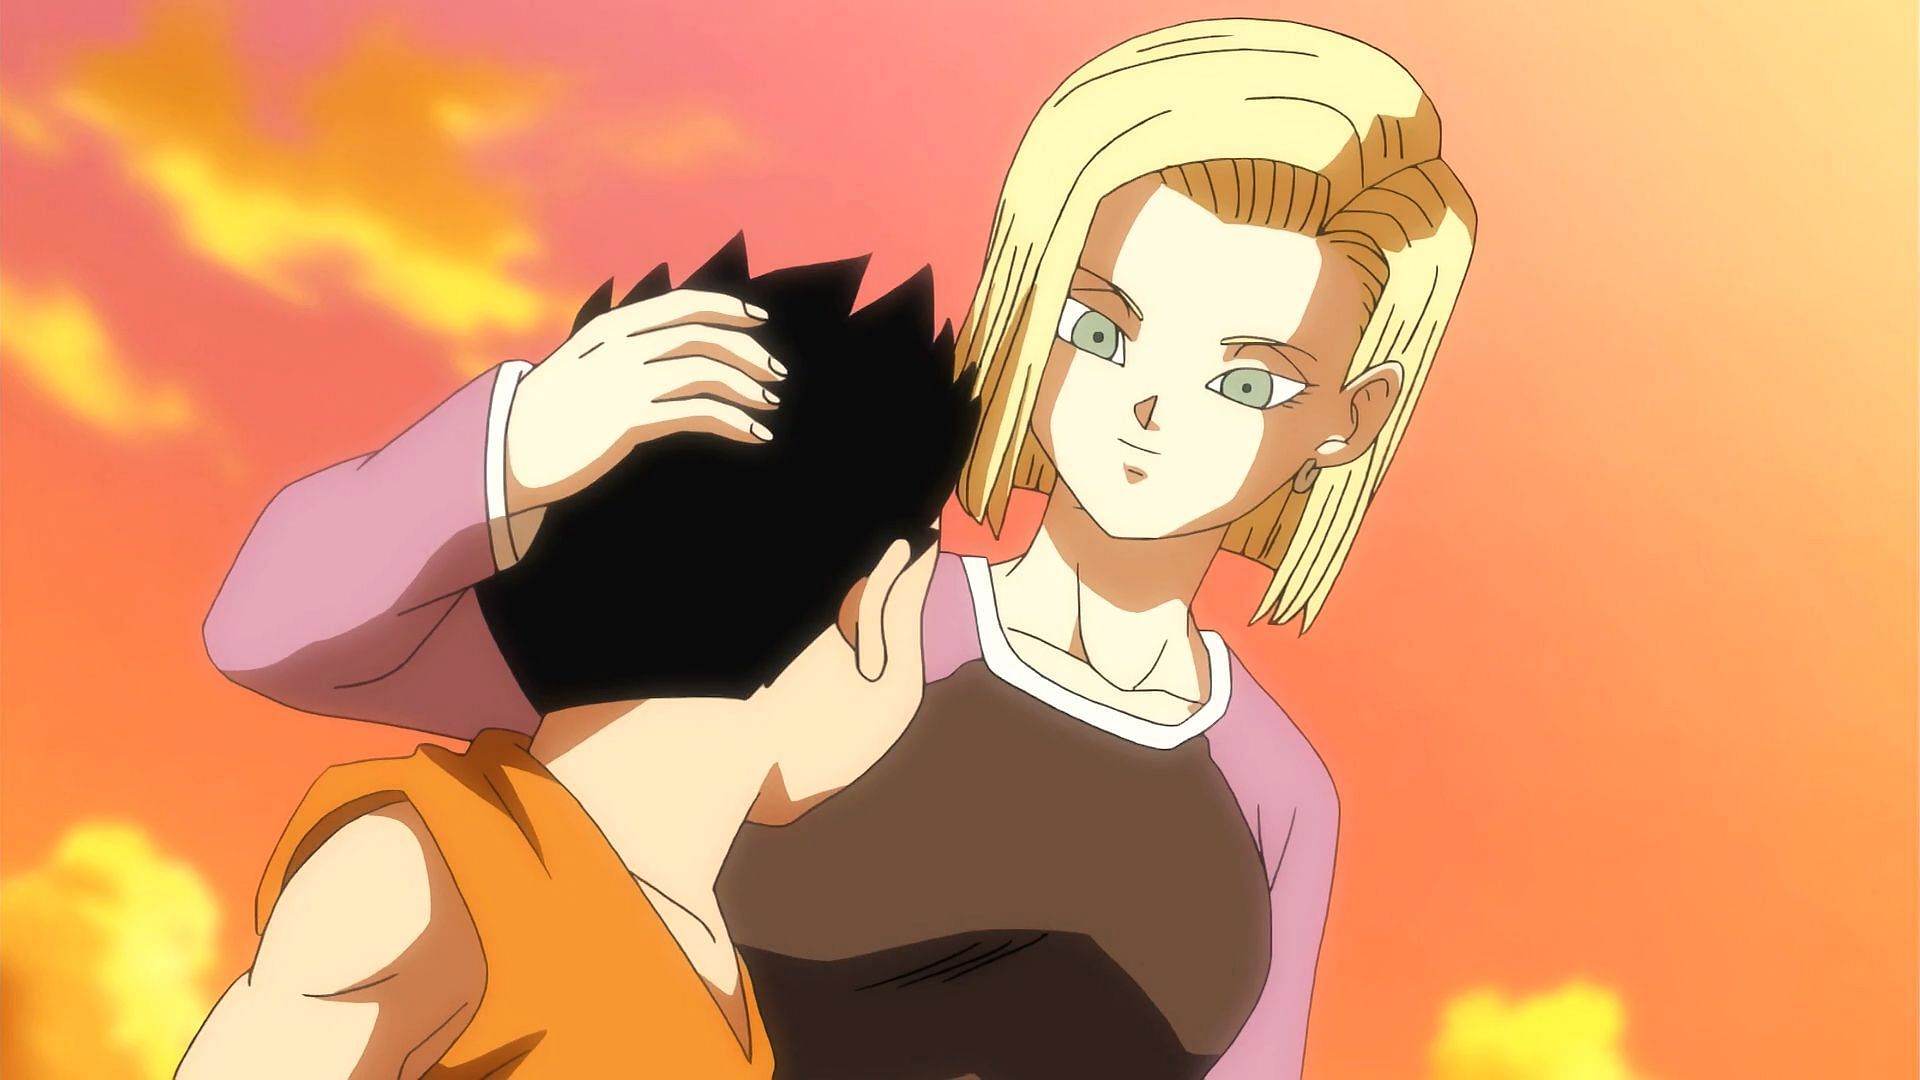 Dragon Ball fans love seeing these two together (Image via Toei Animation)